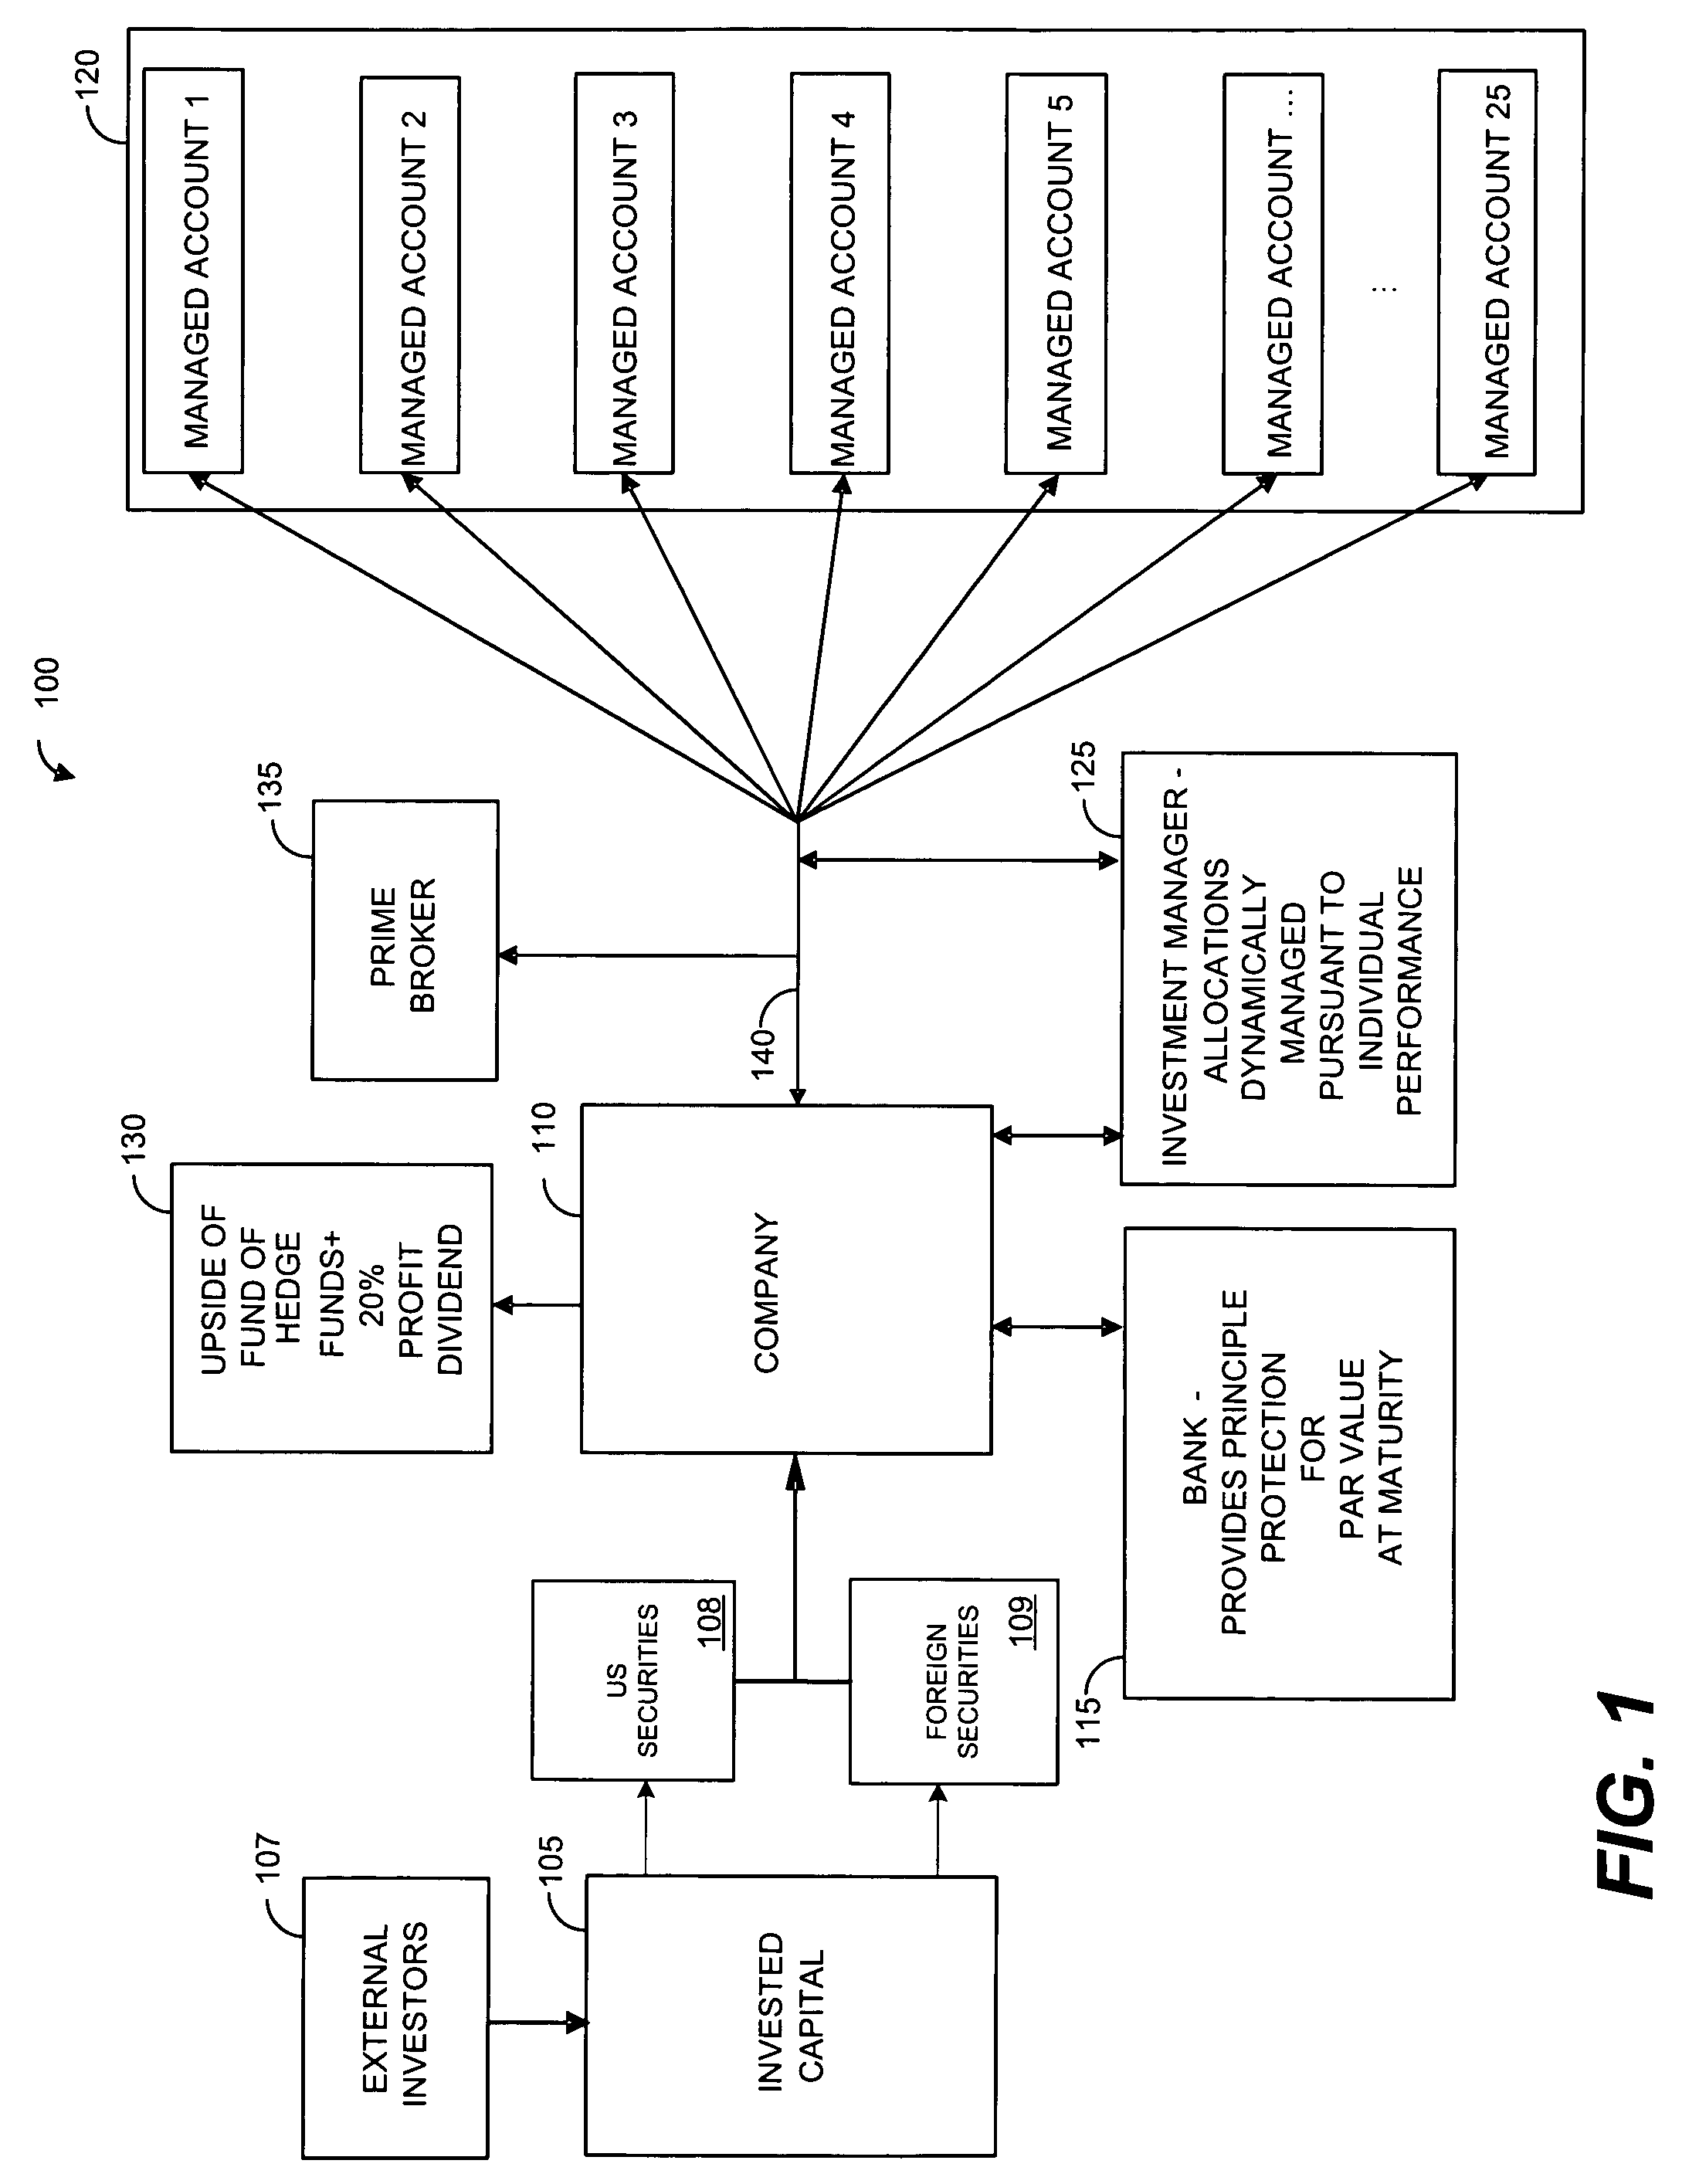 System and method for managing a stable of managed accounts over a distributed network